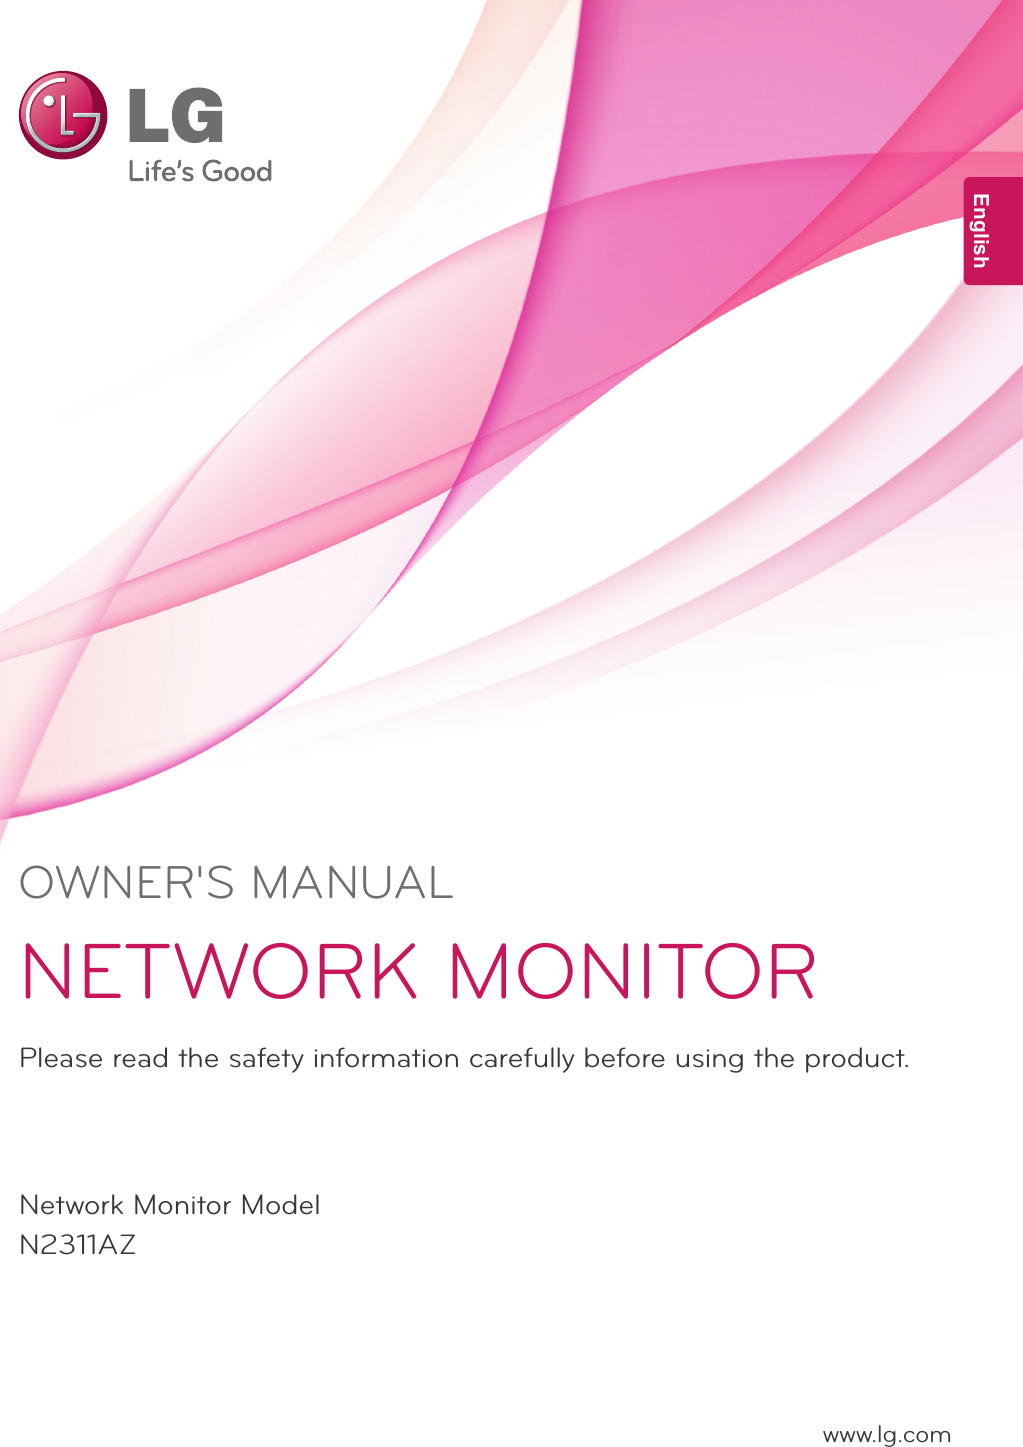 www.lg.comOWNER&apos;S MANUALNETWORK MONITORN2311AZPlease read the safety information carefully before using the product.Network Monitor ModelEnglish